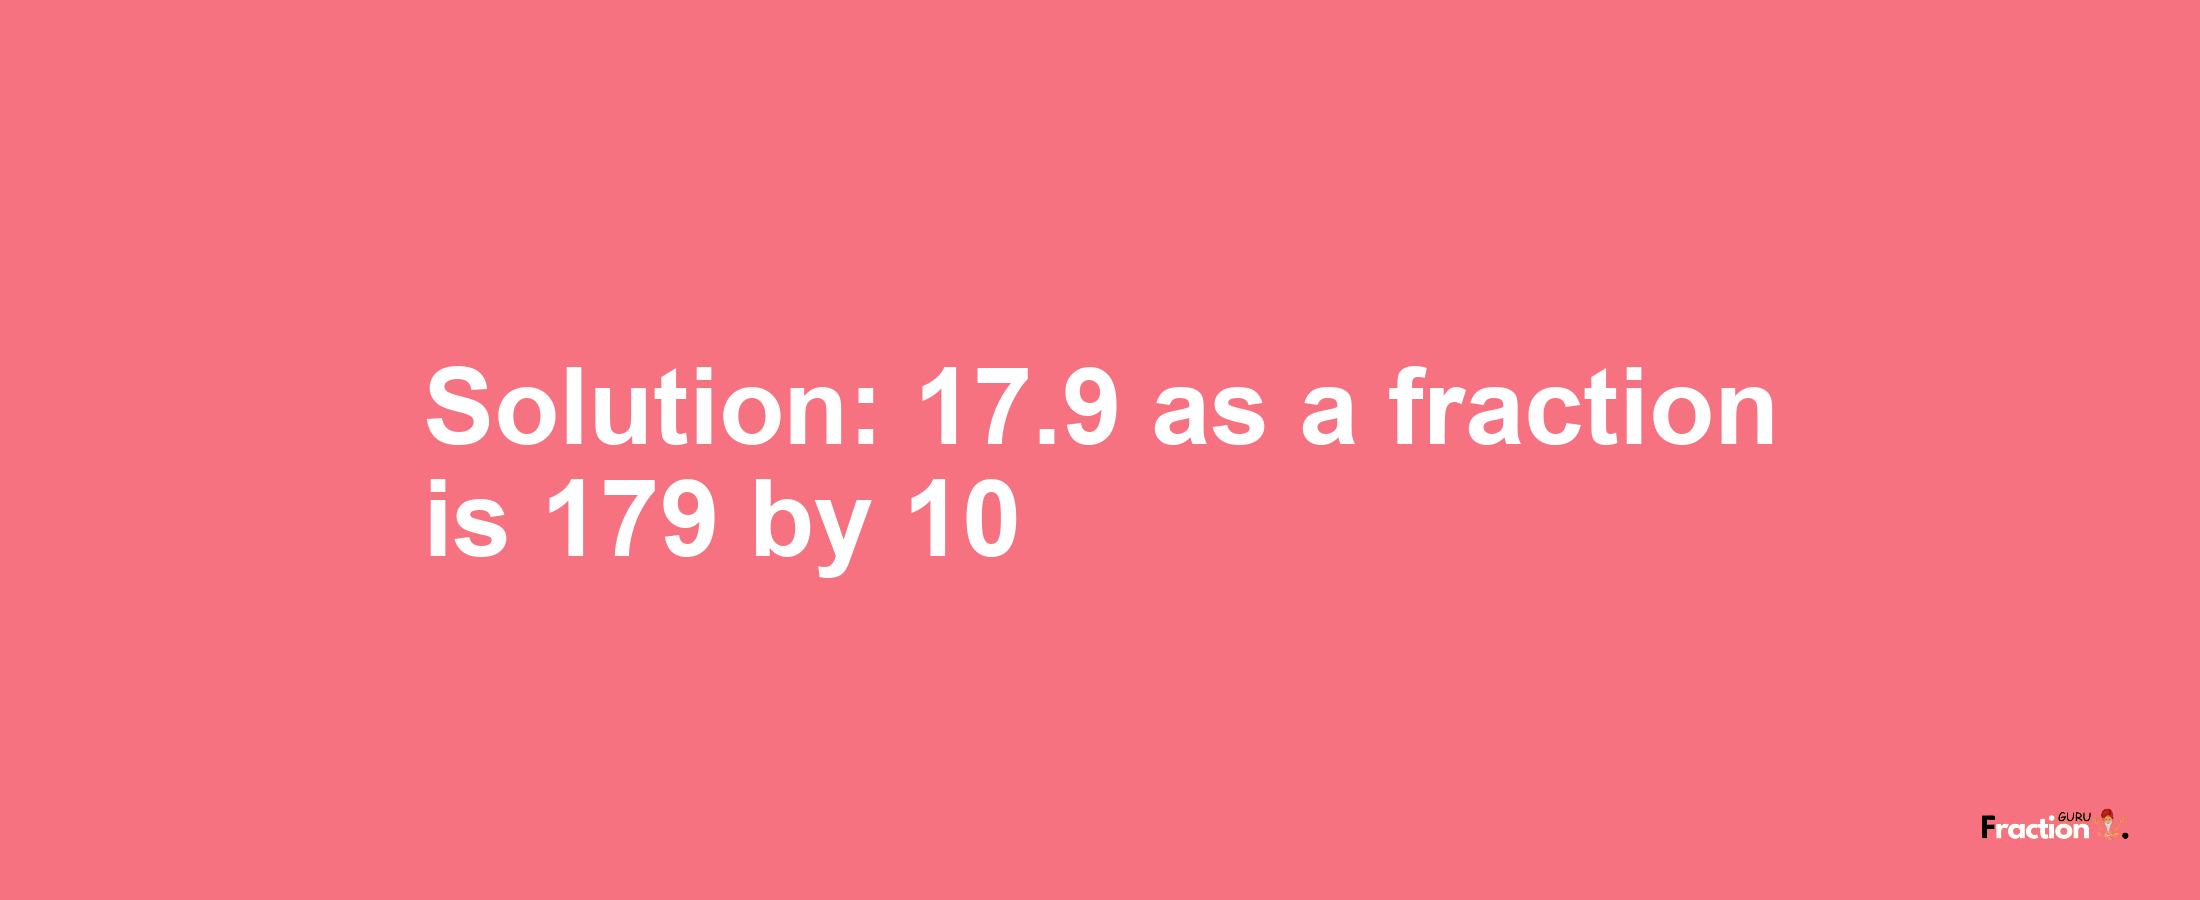 Solution:17.9 as a fraction is 179/10